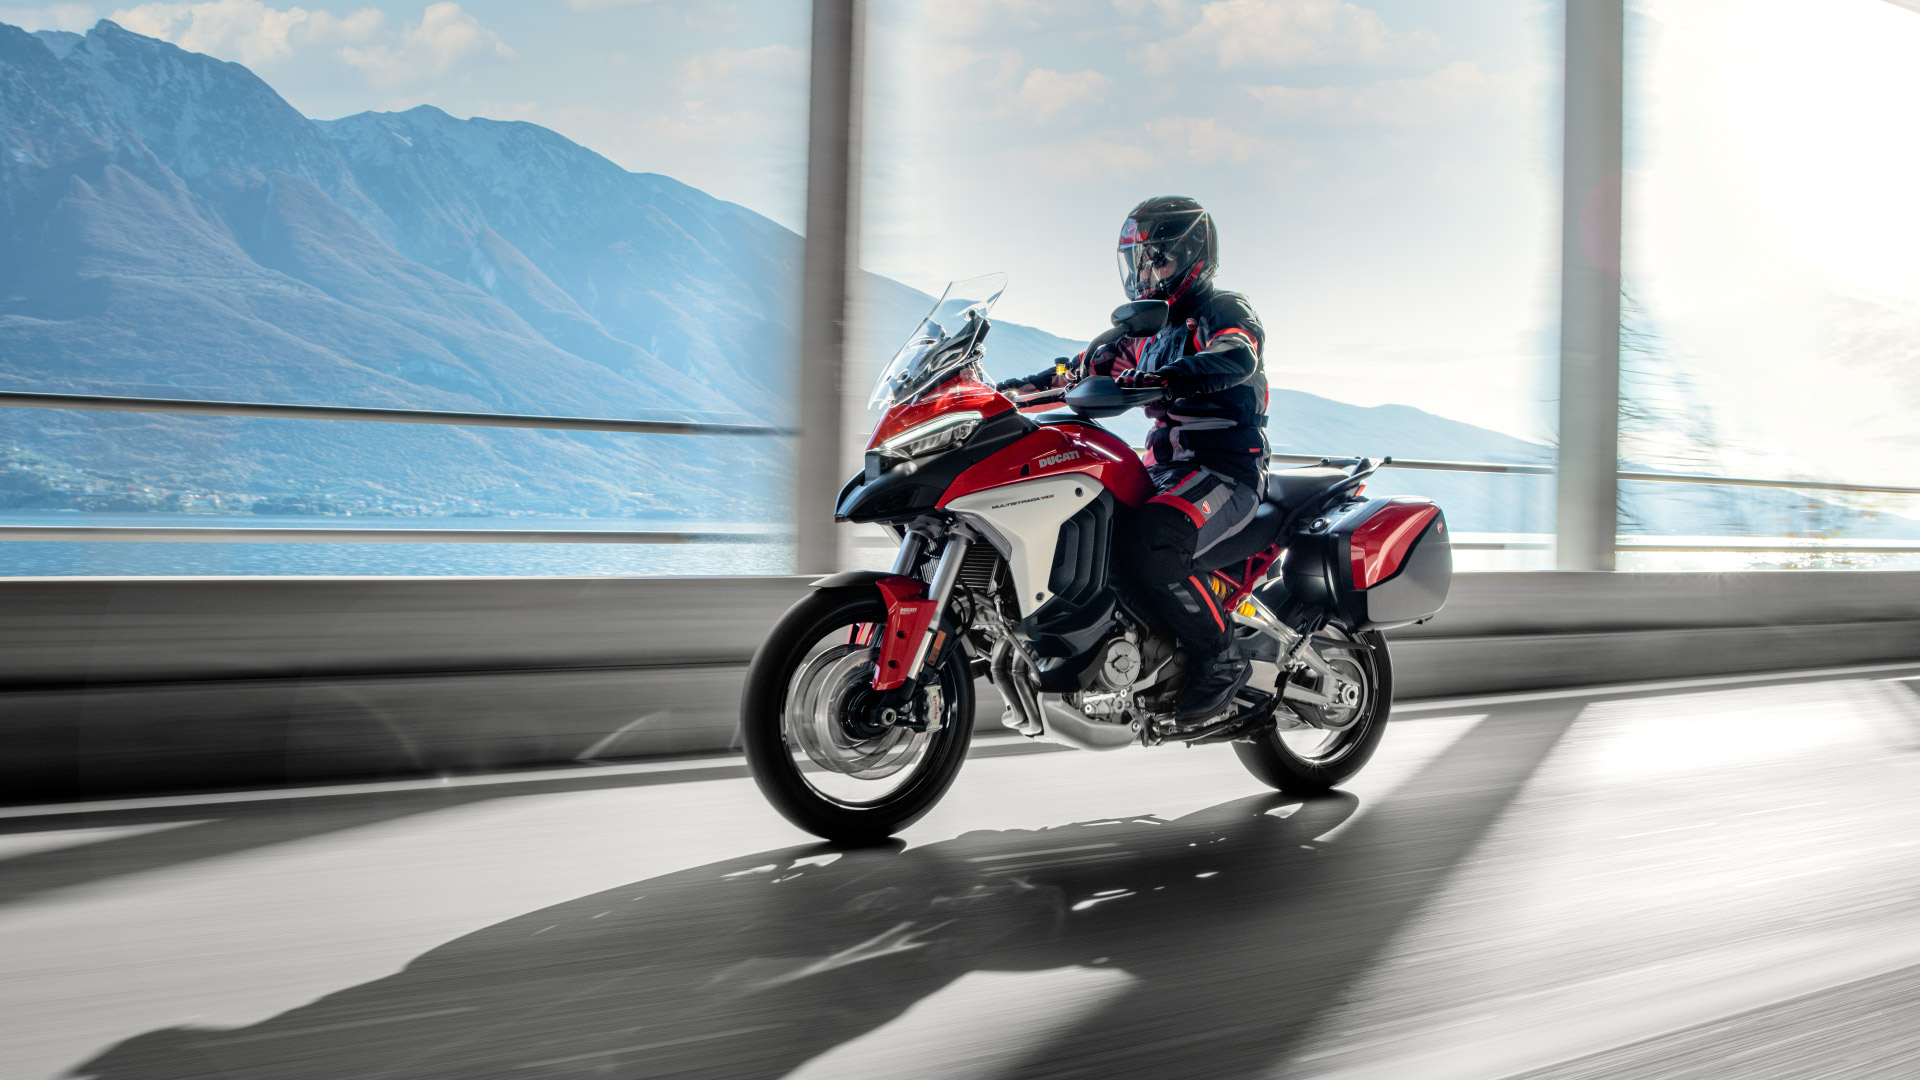 Ducati Multistrada V4 with mountain background